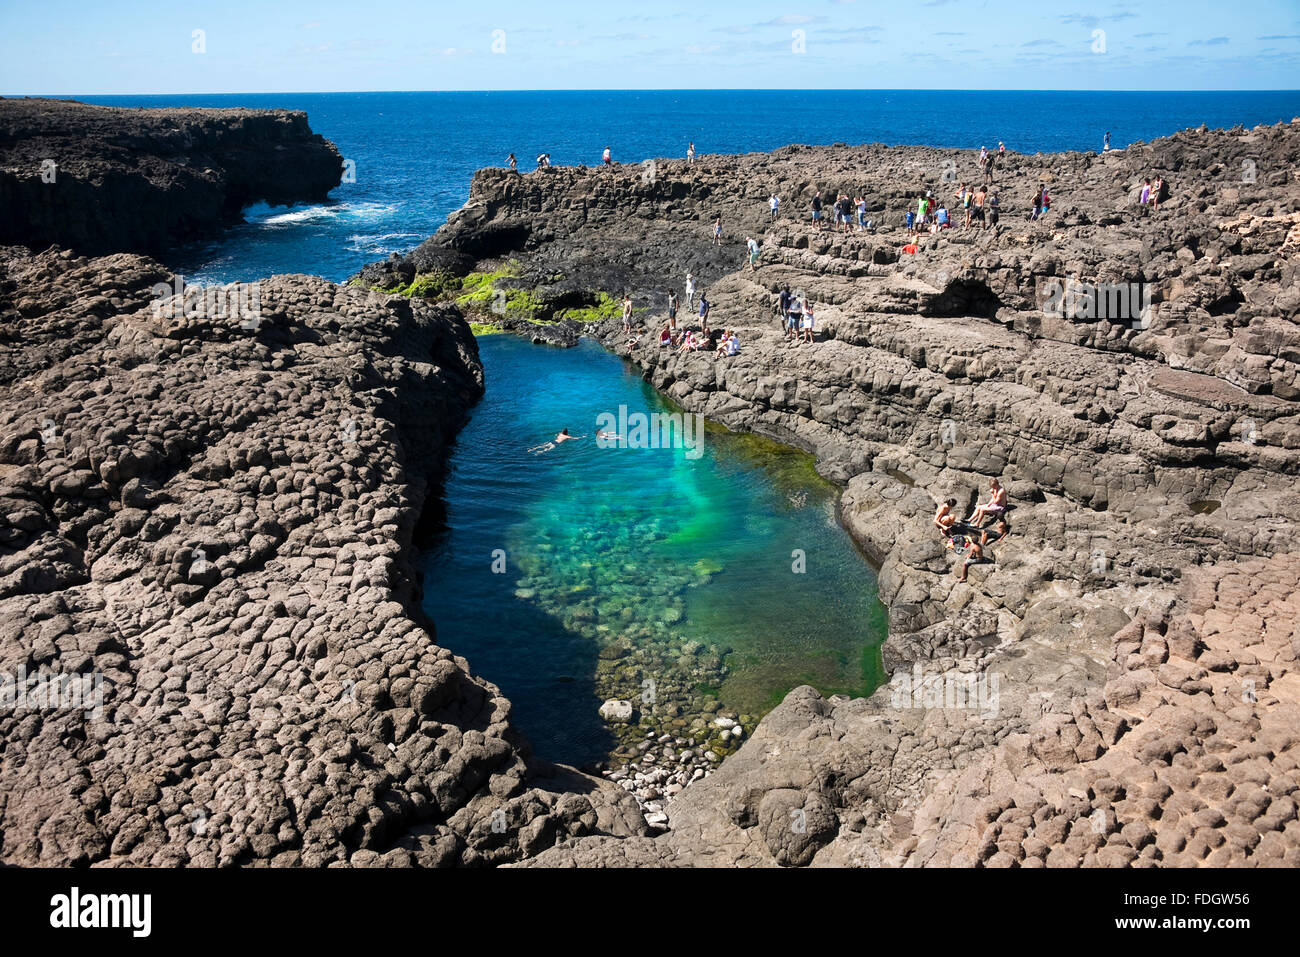 Horizontal view of tourists swimming in the lagoon at Olho Azul, the Blue Eye in Buracona. Stock Photo